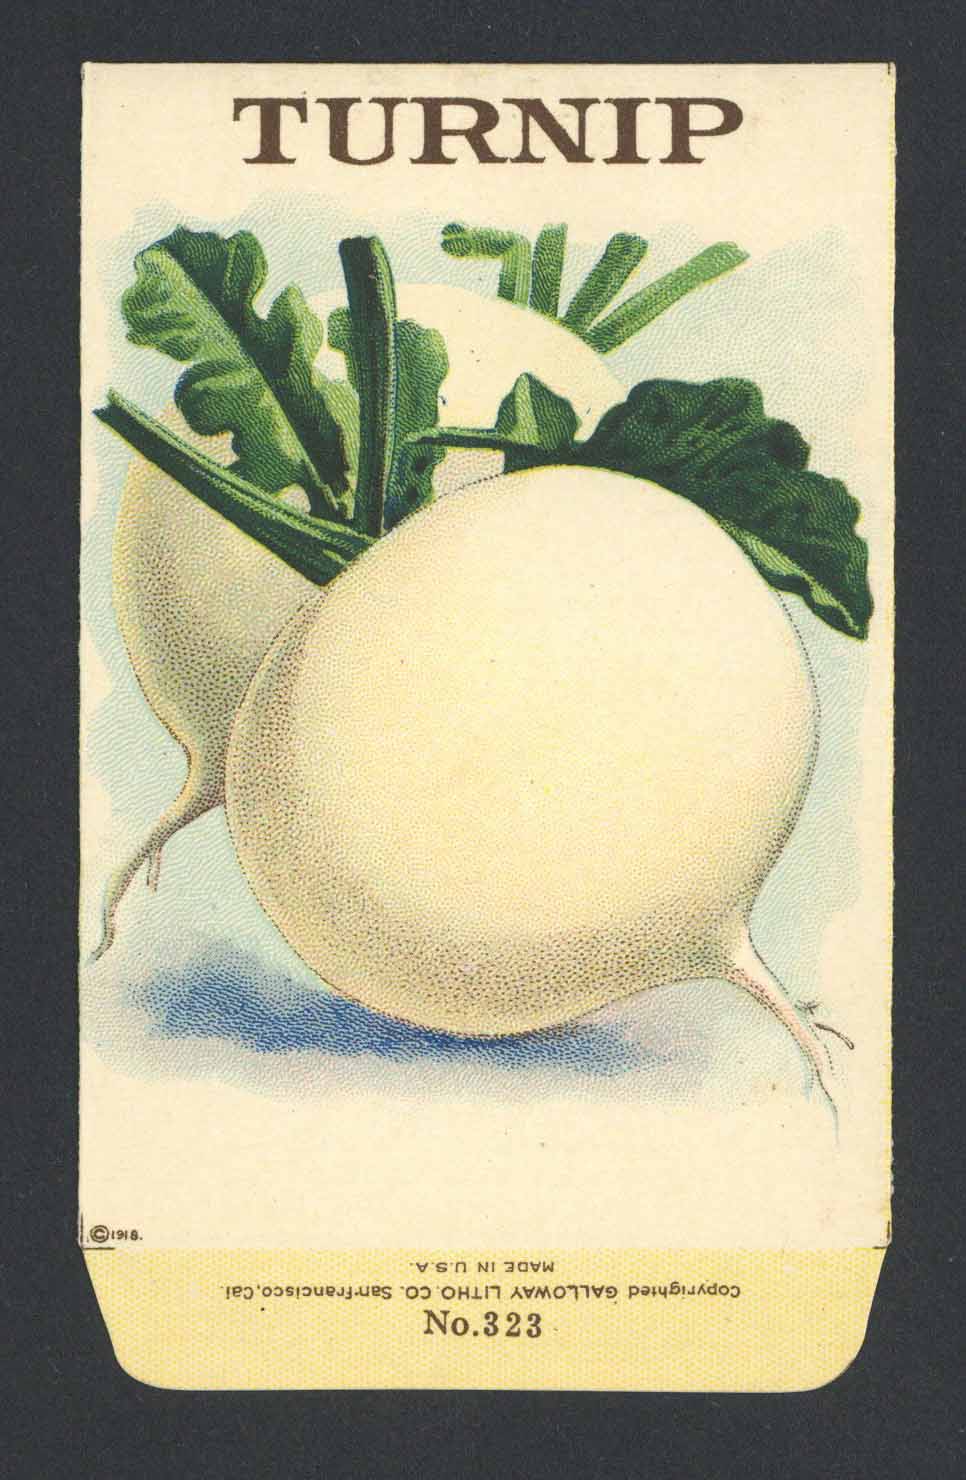 Turnip Antique Stock Seed Packet